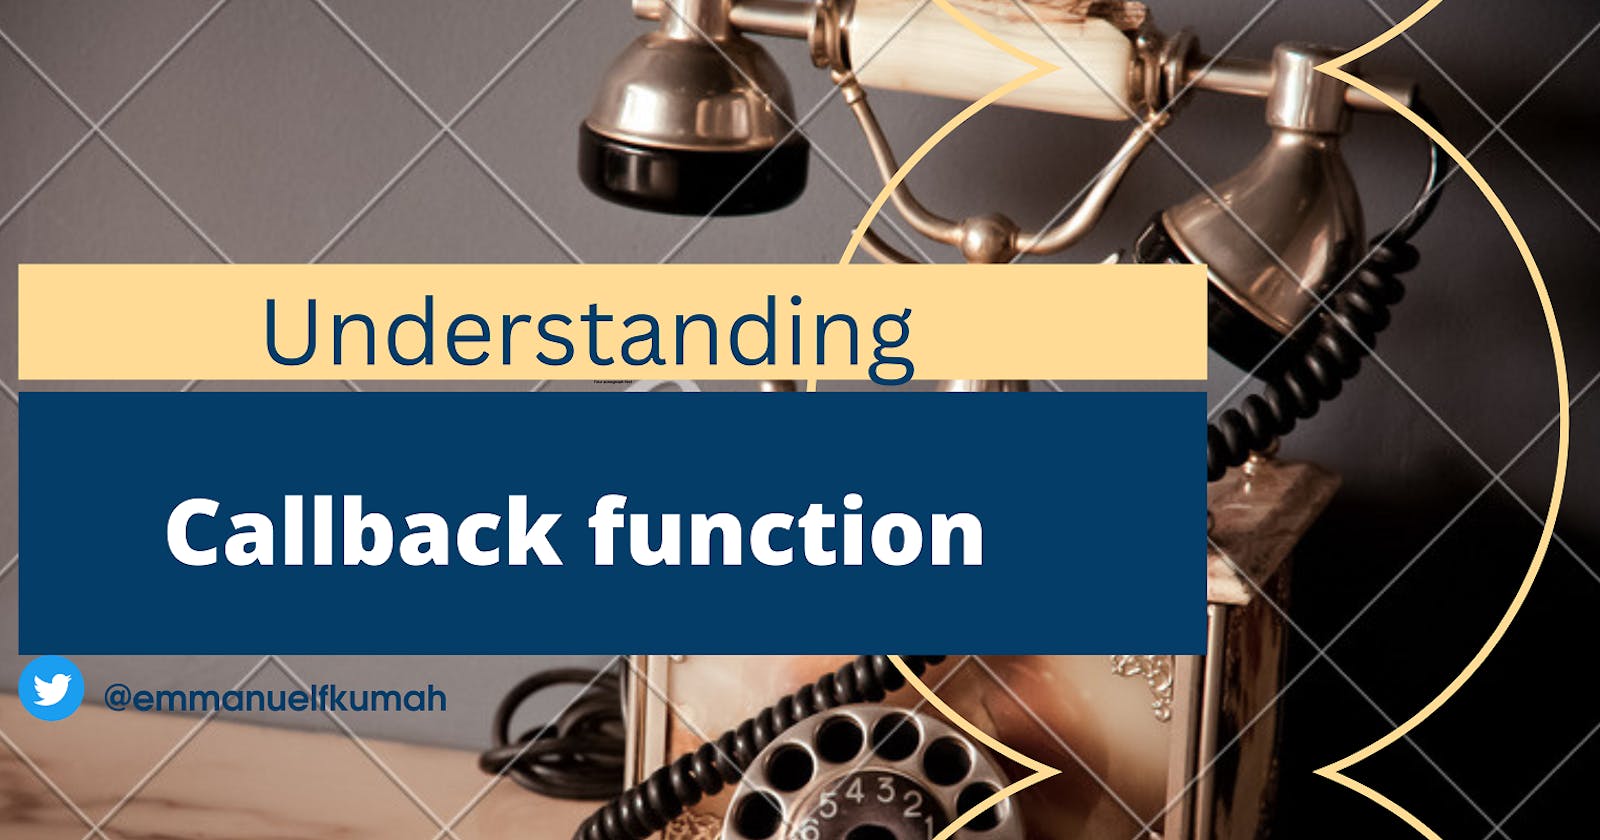 The simple guide to understanding Callback functions in JavaScript